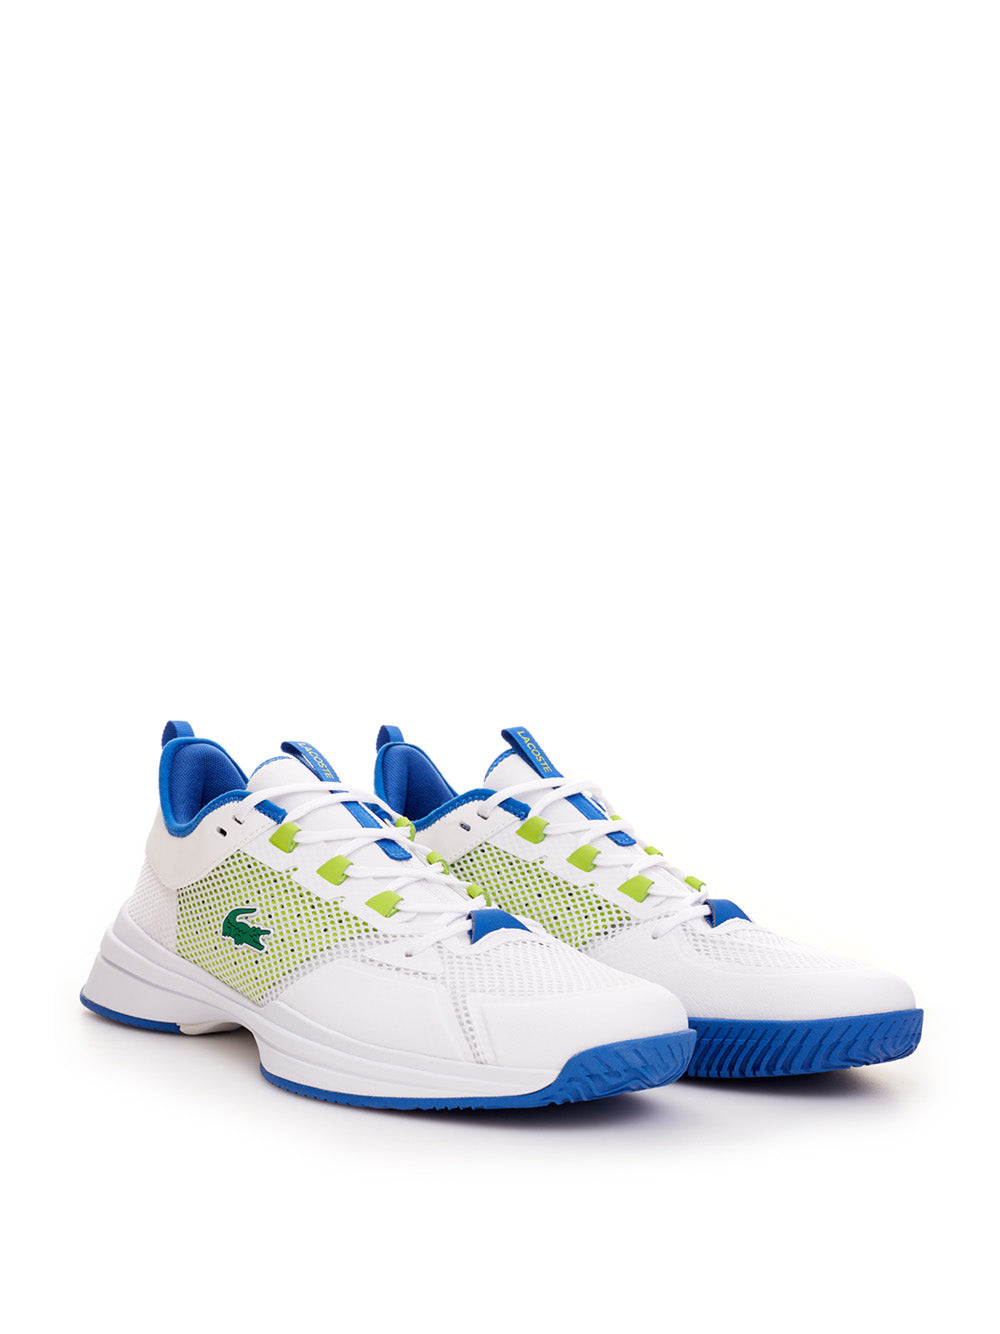 White Lacoste Mesh Fabric Sneakers